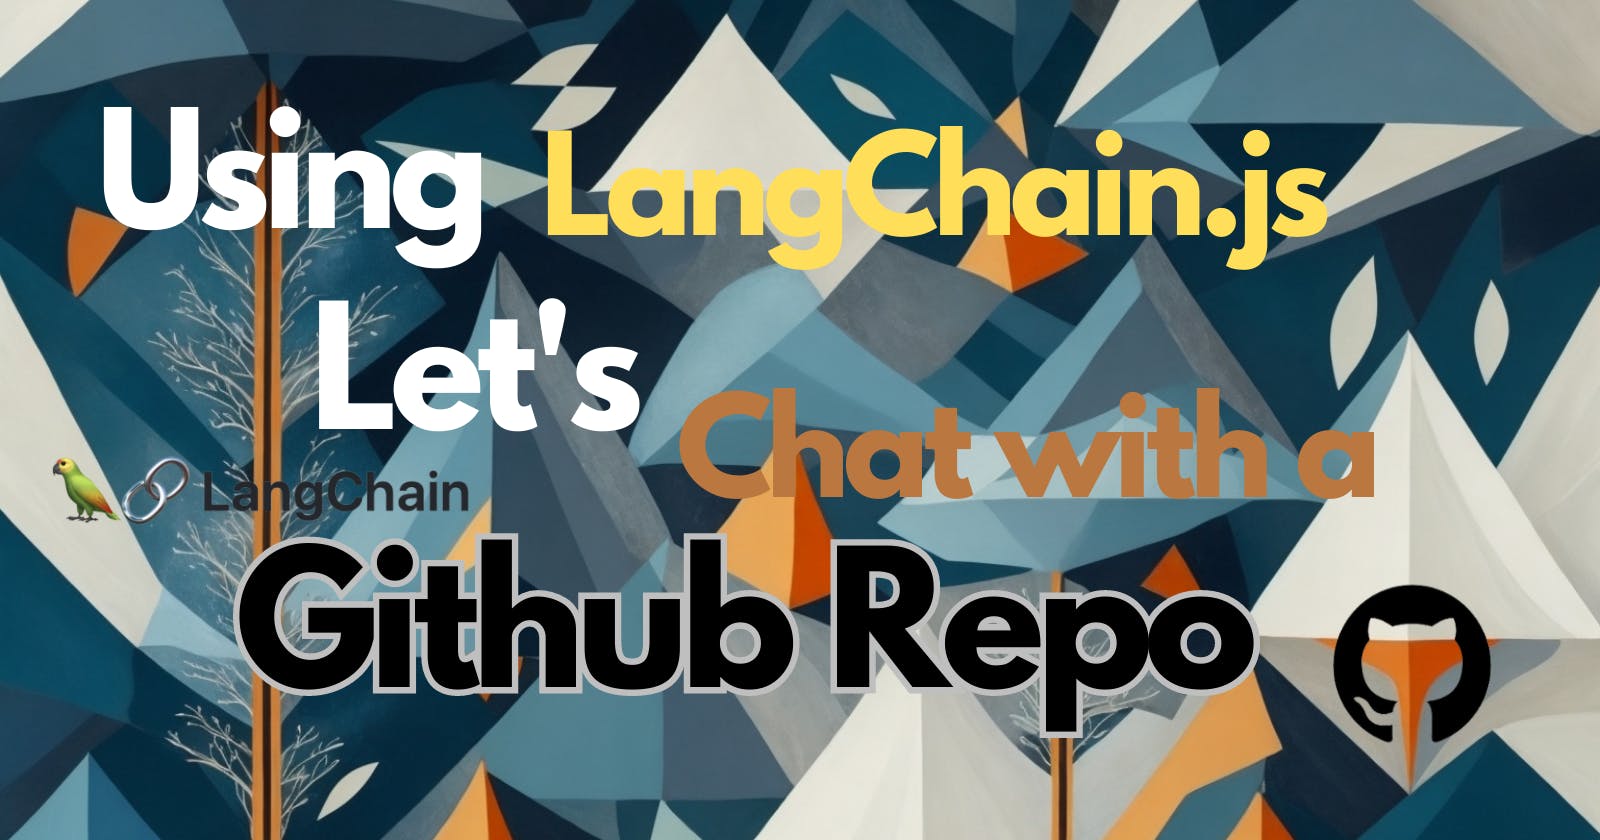 Chat with a Github repository using Langchainjs and JavaScript